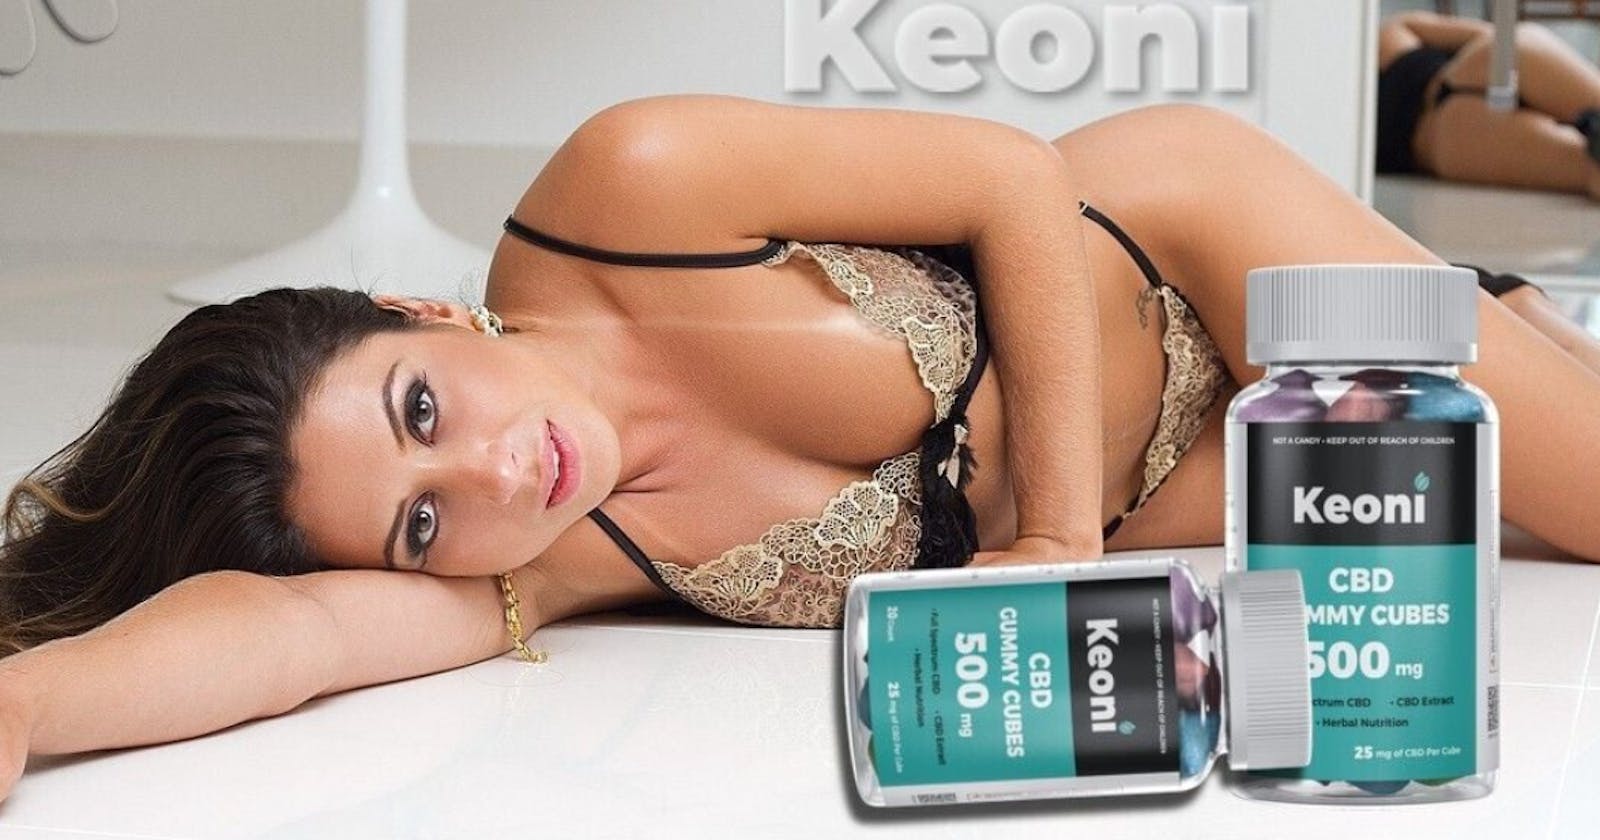 Keoni CBD Male Enhancement Gummies - Improved Natural Health Today!